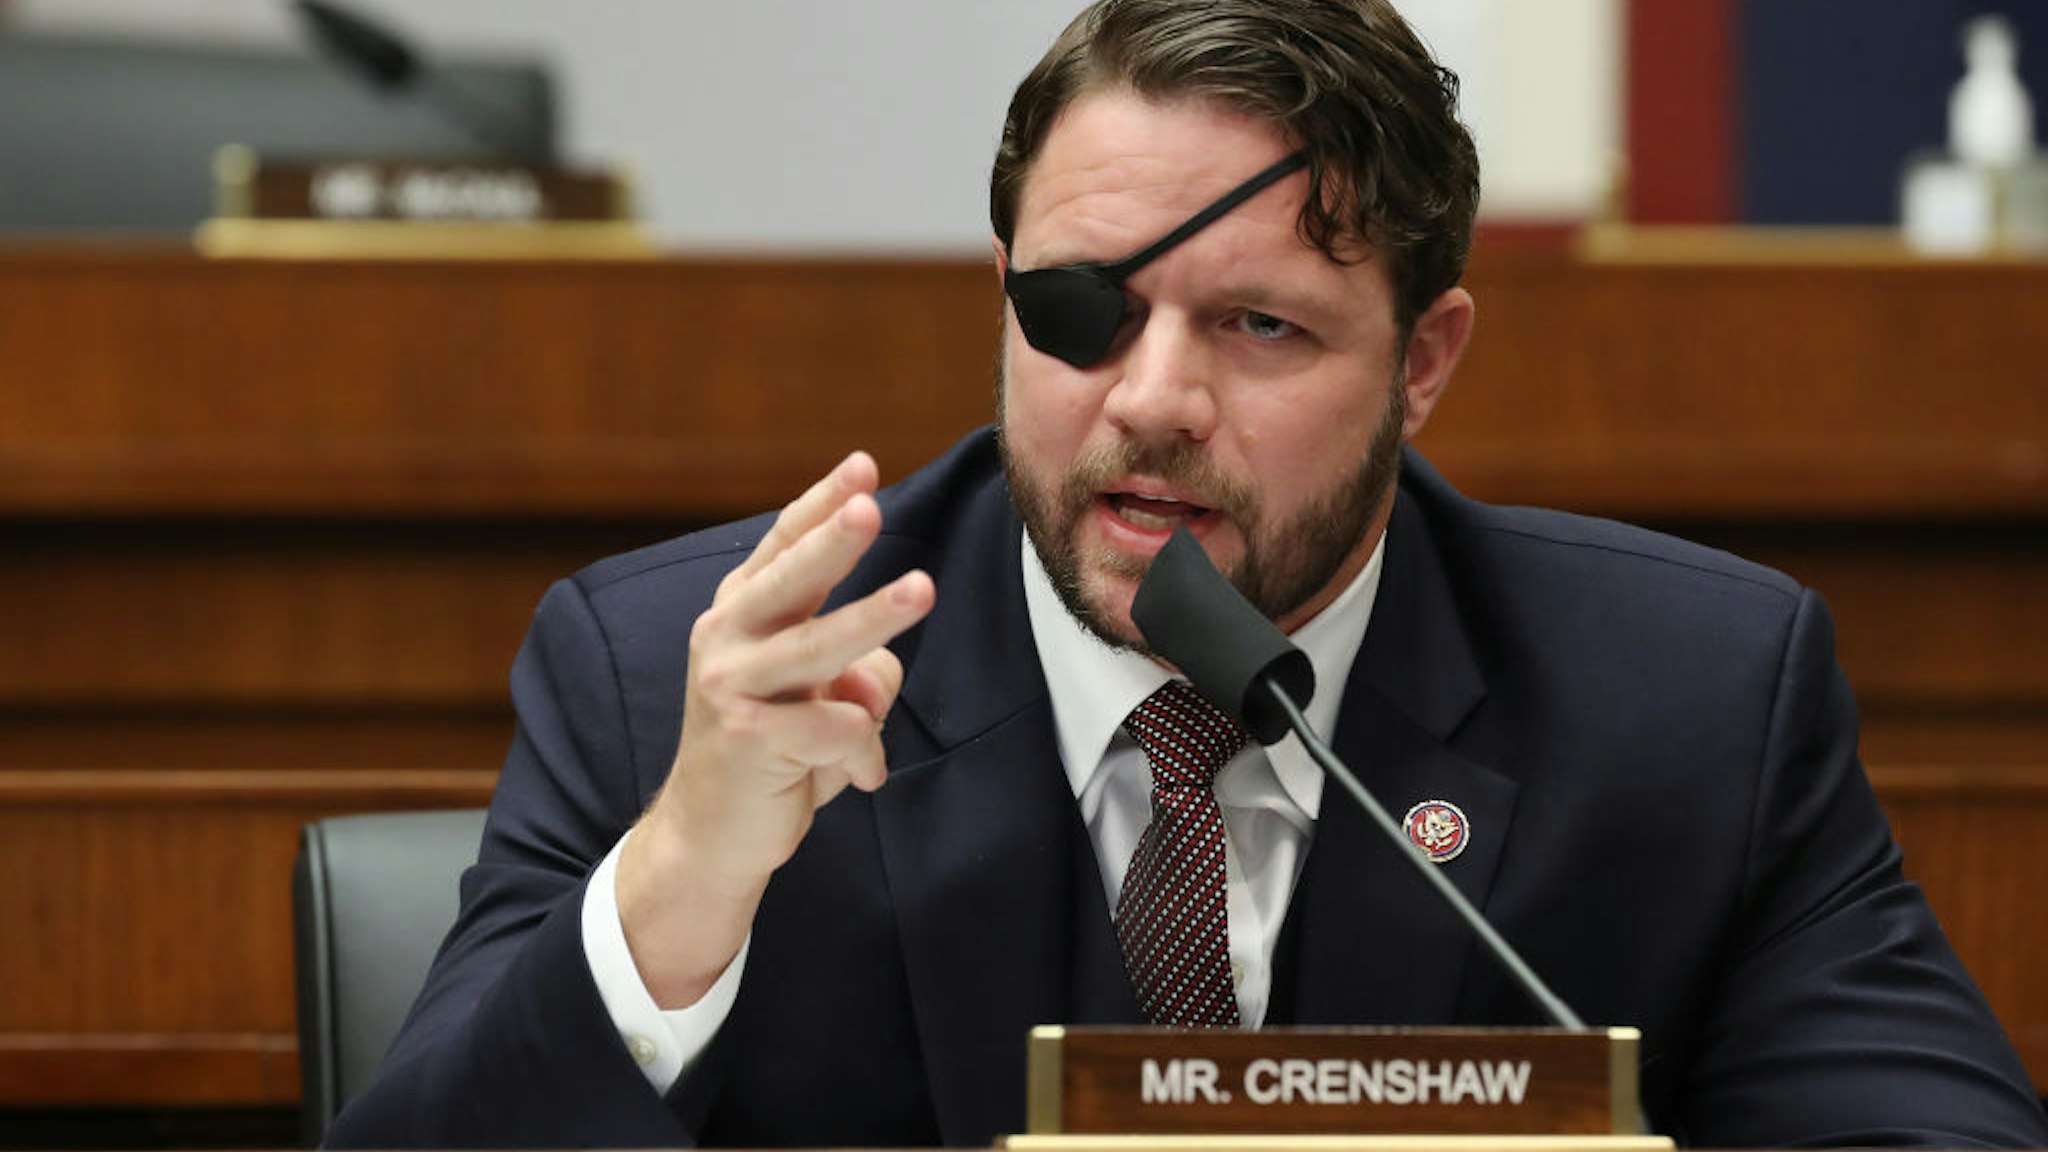 WASHINGTON, DC - SEPTEMBER 17: House Homeland Security Committee member Rep. Dan Crenshaw (R-TX) questions witnesses during a hearing on 'worldwide threats to the homeland' in the Rayburn House Office Building on Capitol Hill September 17, 2020 in Washington, DC. Committee Chairman Bennie Thompson (D-MS) said he would issue a subpoena for acting Homeland Security Secretary Chad Wolf after he did not show for the hearing. An August Government Accountability Office report found that Wolf's appointment by the Trump Administration, which has regularly skirted the Senate confirmation process, was invalid and a violation of the Federal Vacancies Reform Act. (Photo by Chip Somodevilla/Getty Images)